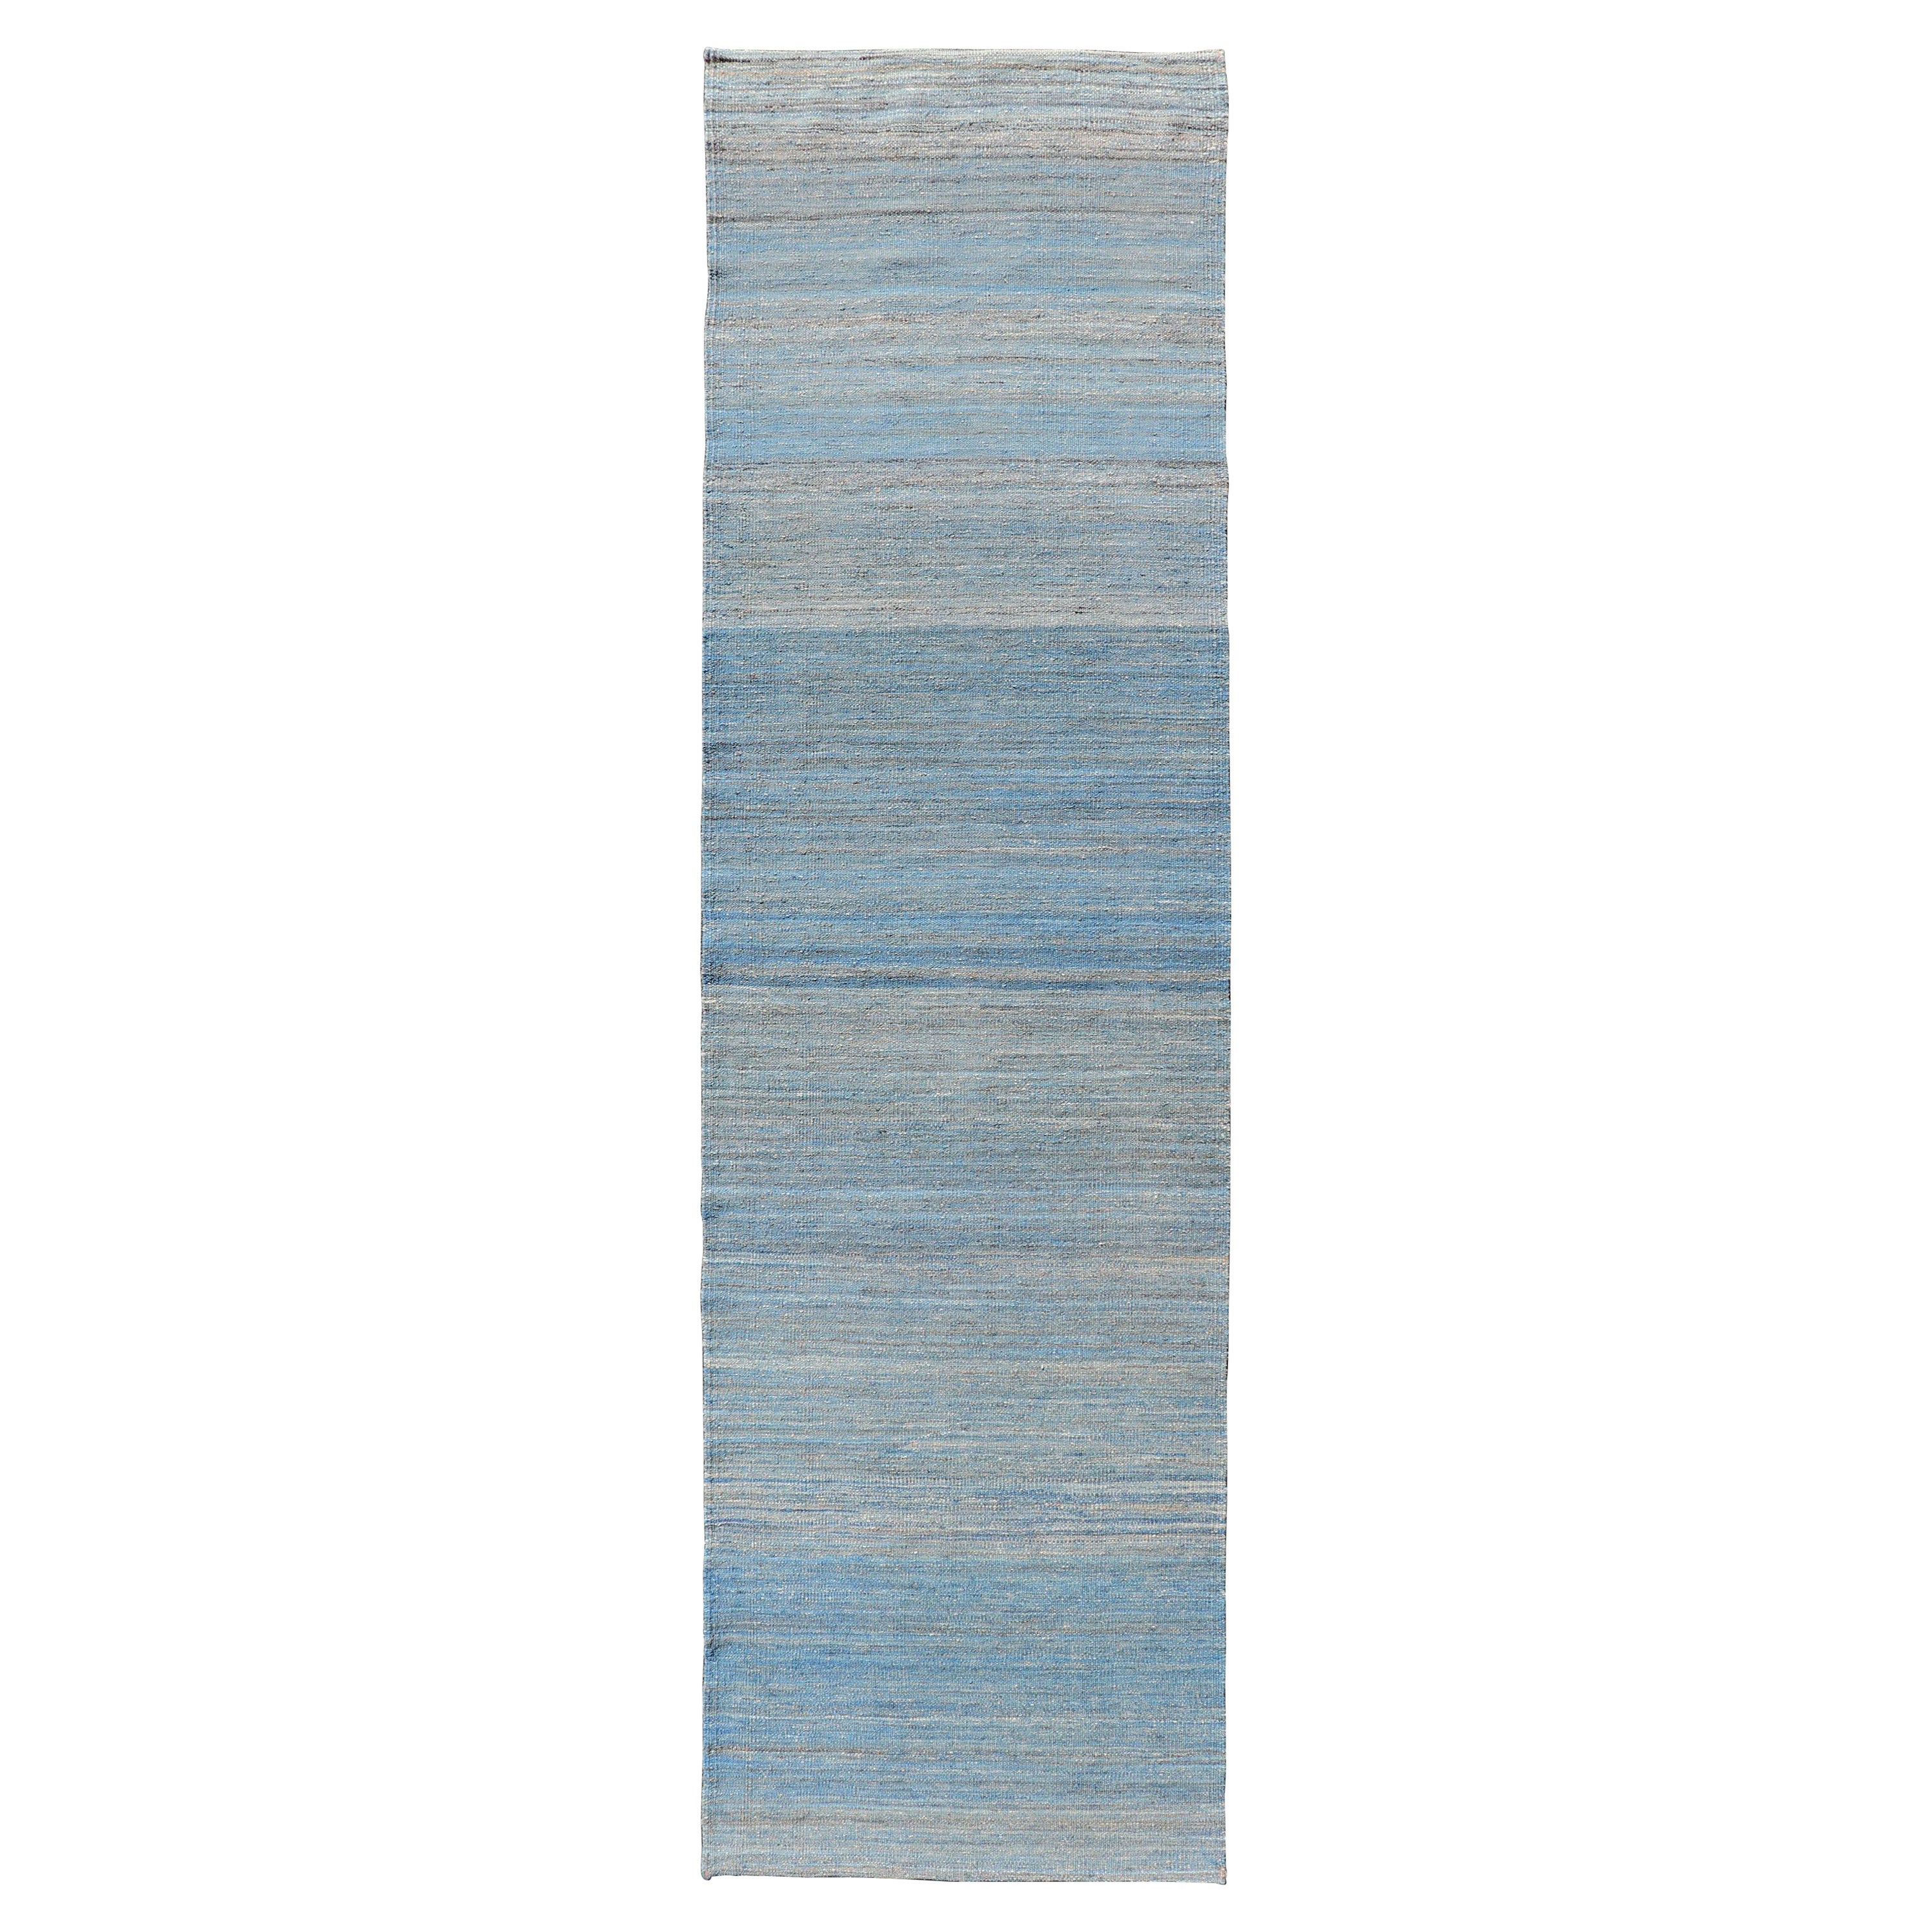 Runner Flat-Weave in Modern design in Shades of Blue, Green and Taupe For Sale